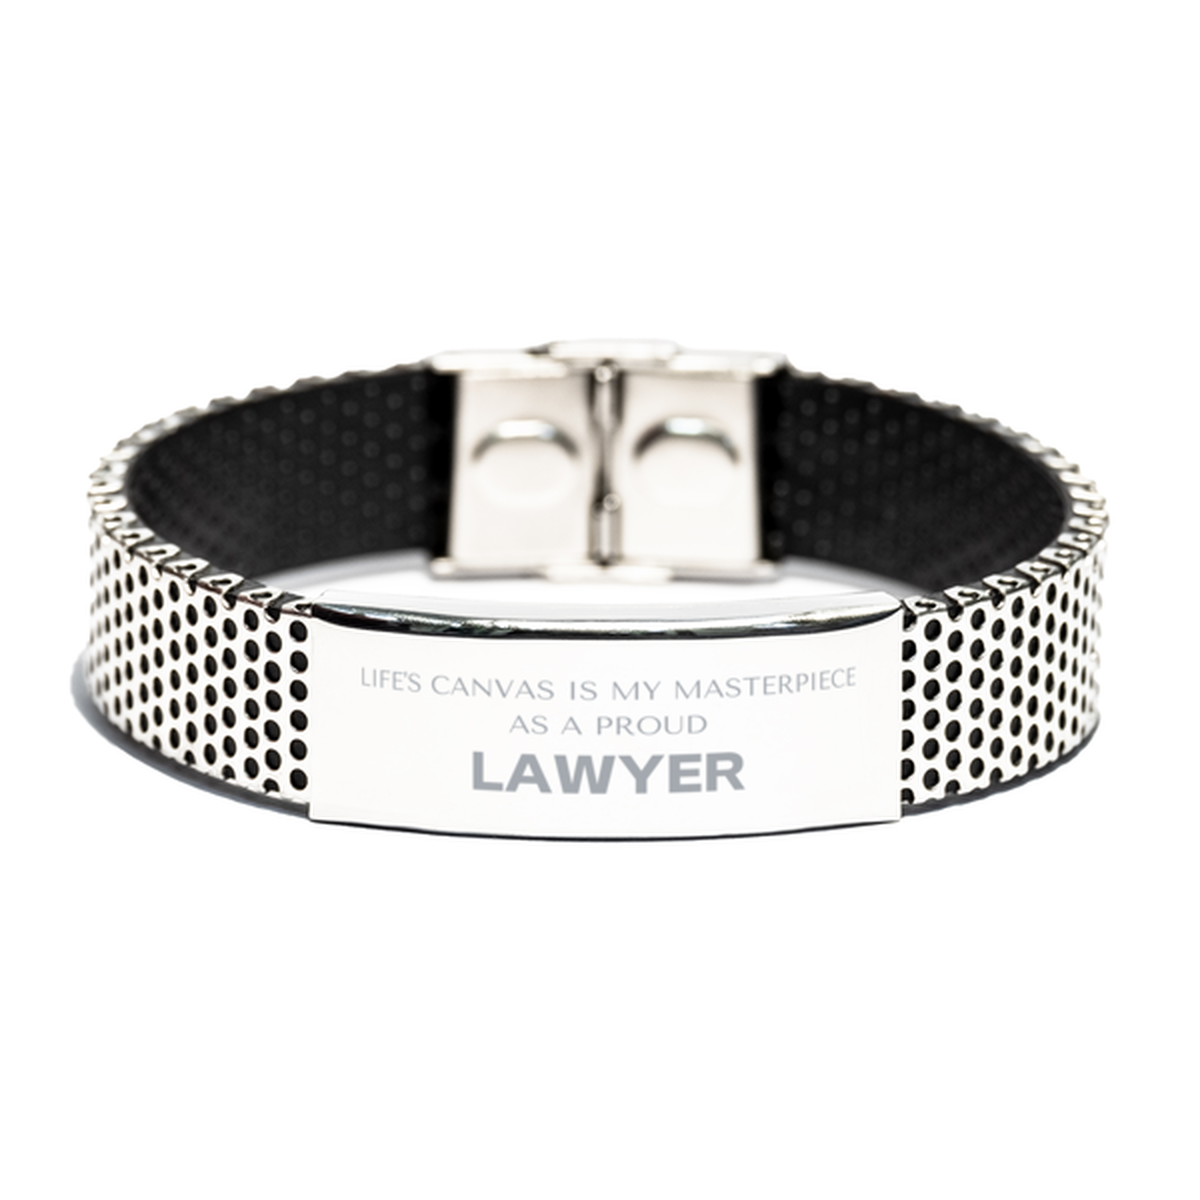 Proud Lawyer Gifts, Life's canvas is my masterpiece, Epic Birthday Christmas Unique Stainless Steel Bracelet For Lawyer, Coworkers, Men, Women, Friends